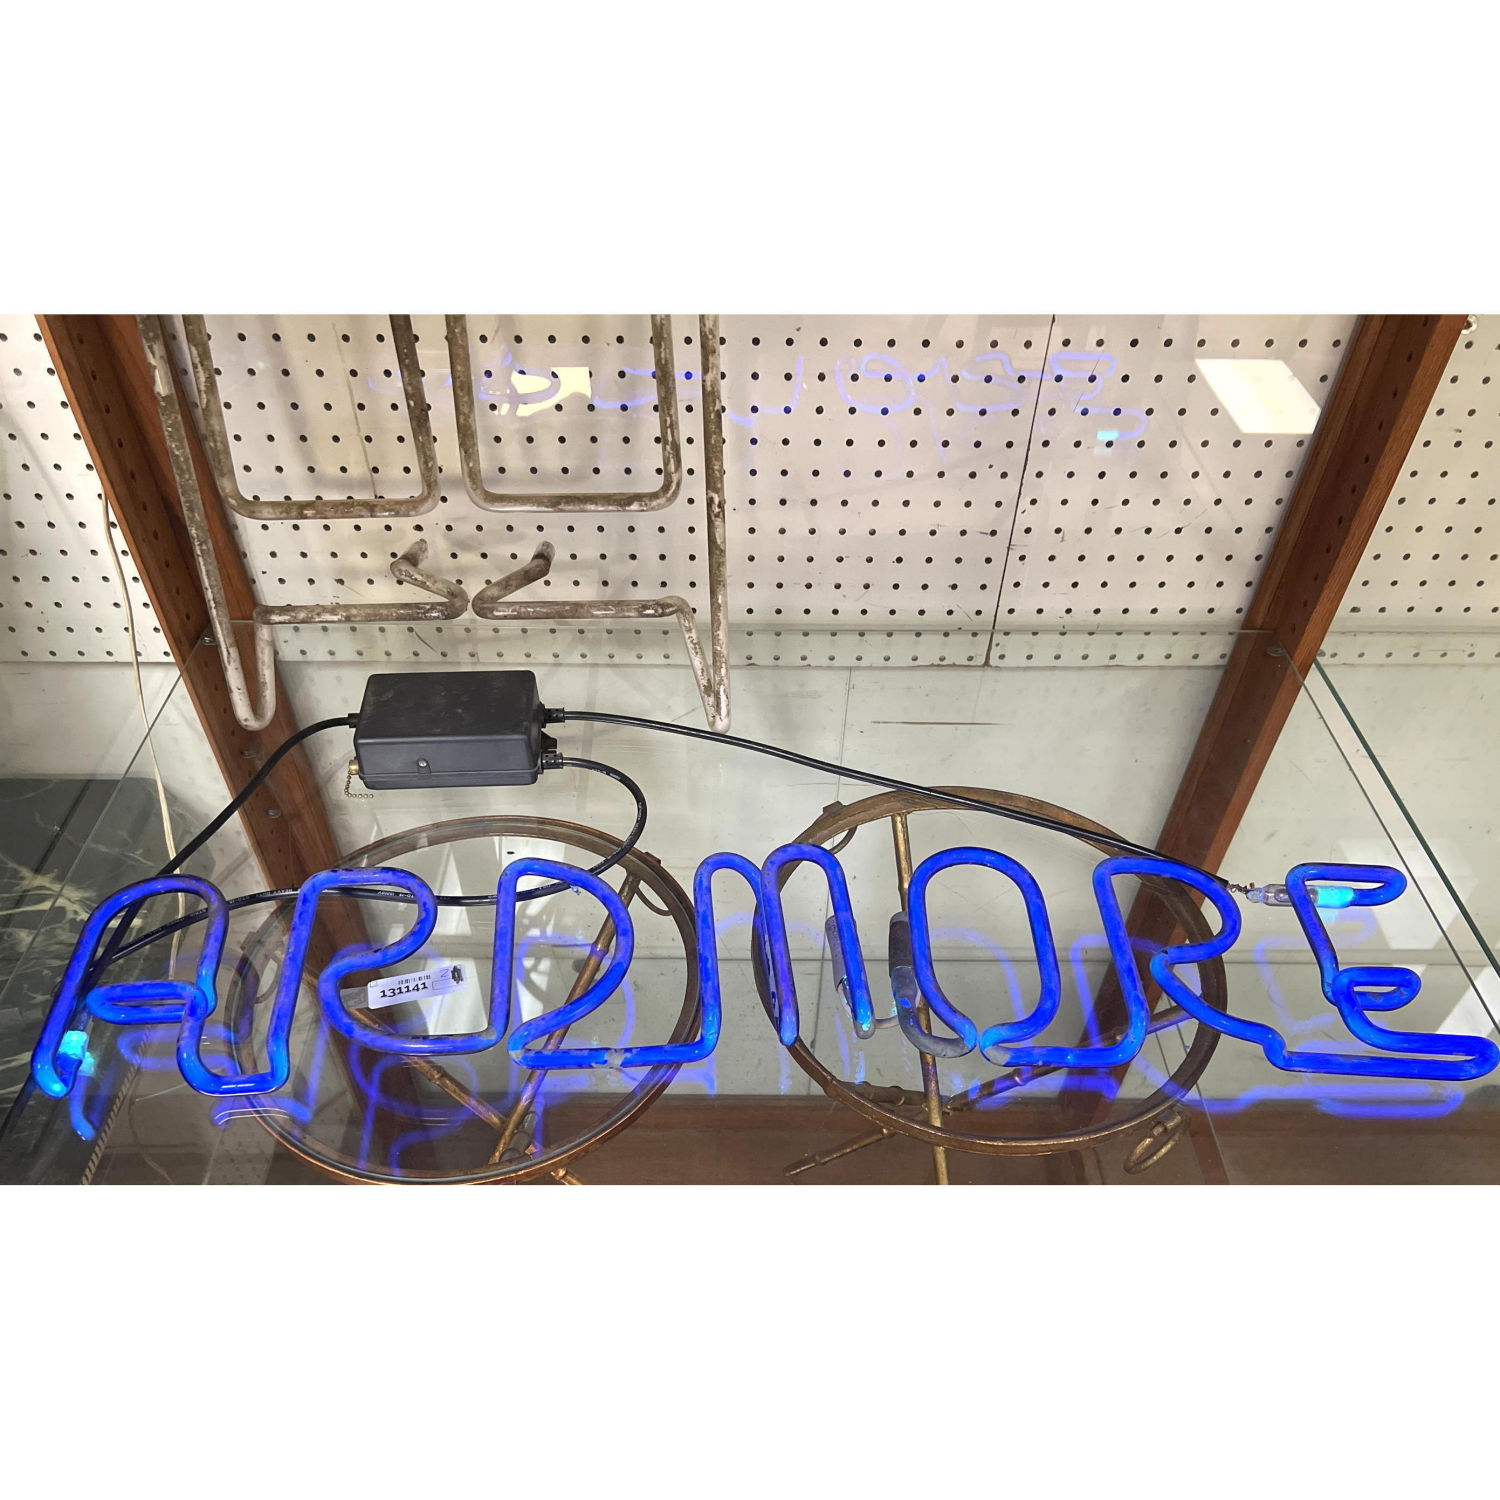 2pc Neon signs ARDMORE and martini 2ff3a2